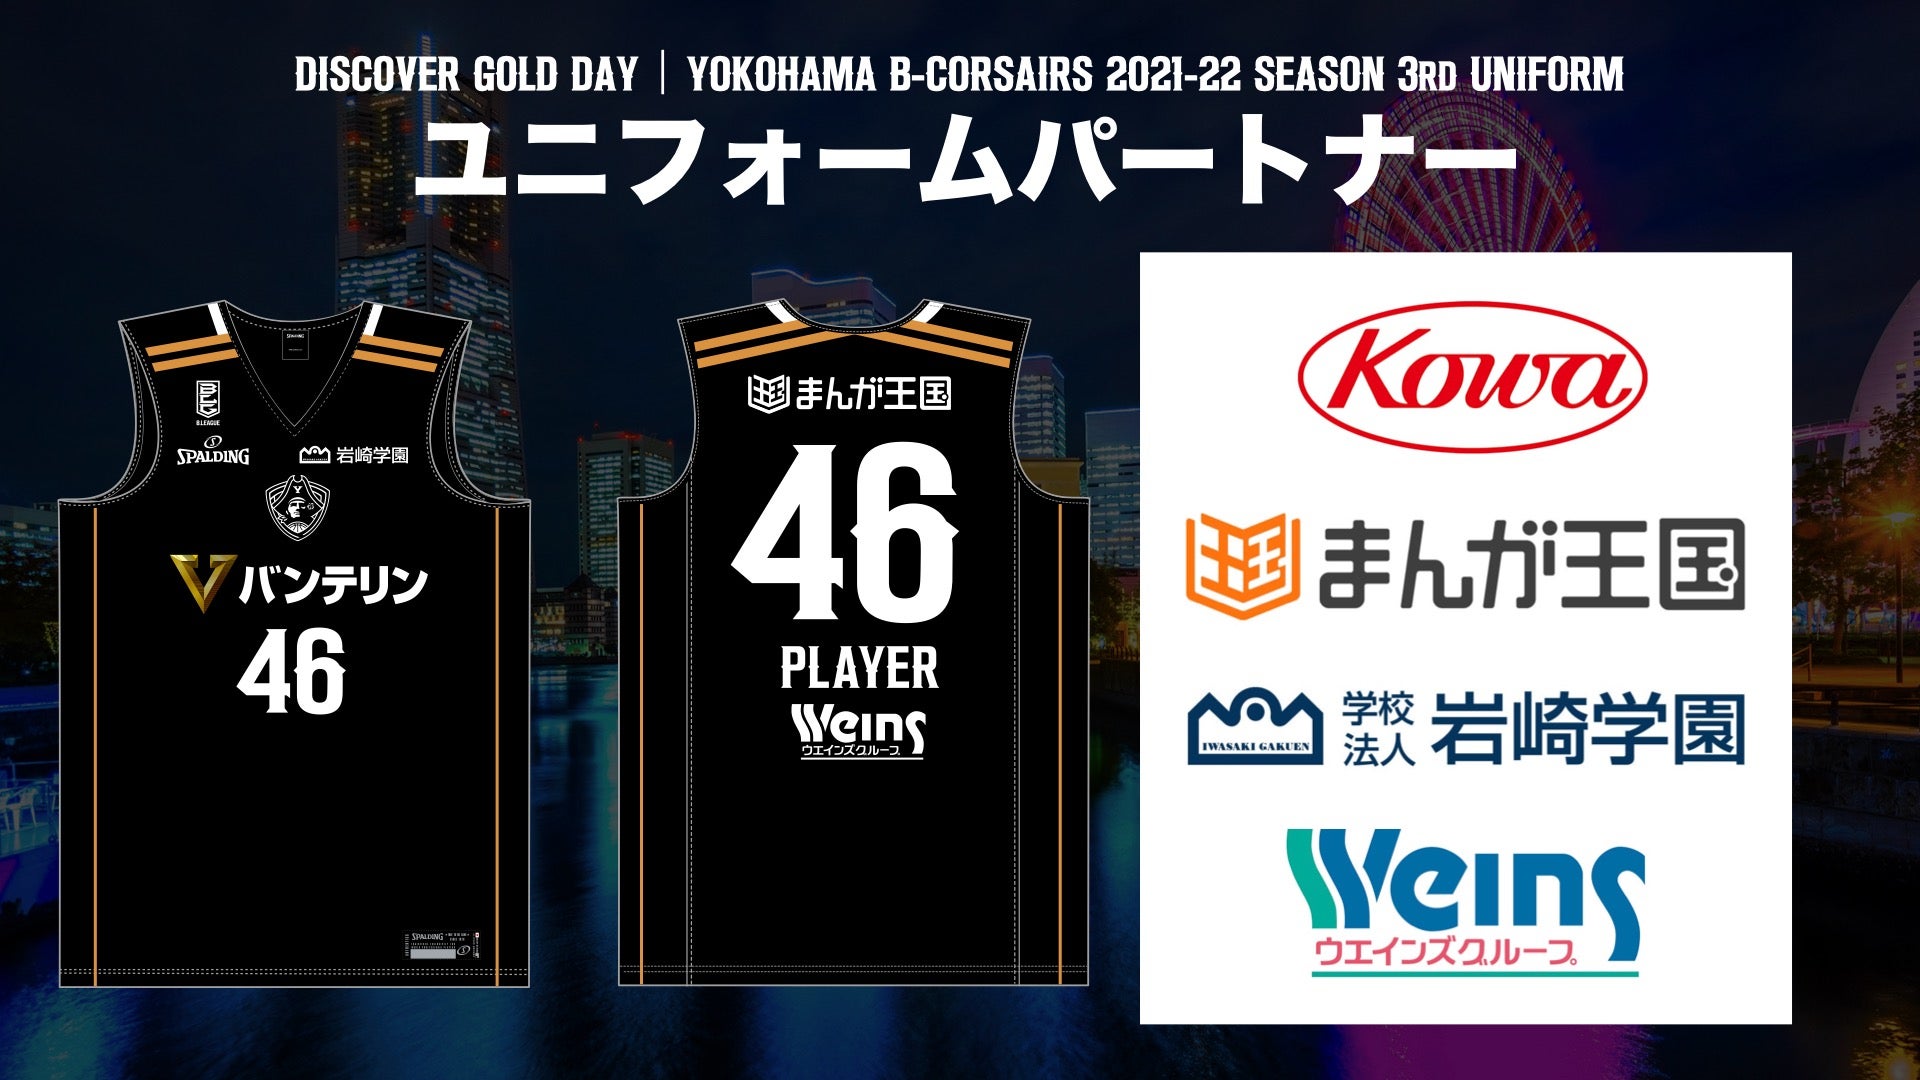 DISCOVER GOLD DAY 3rdユニフォームパートナー
